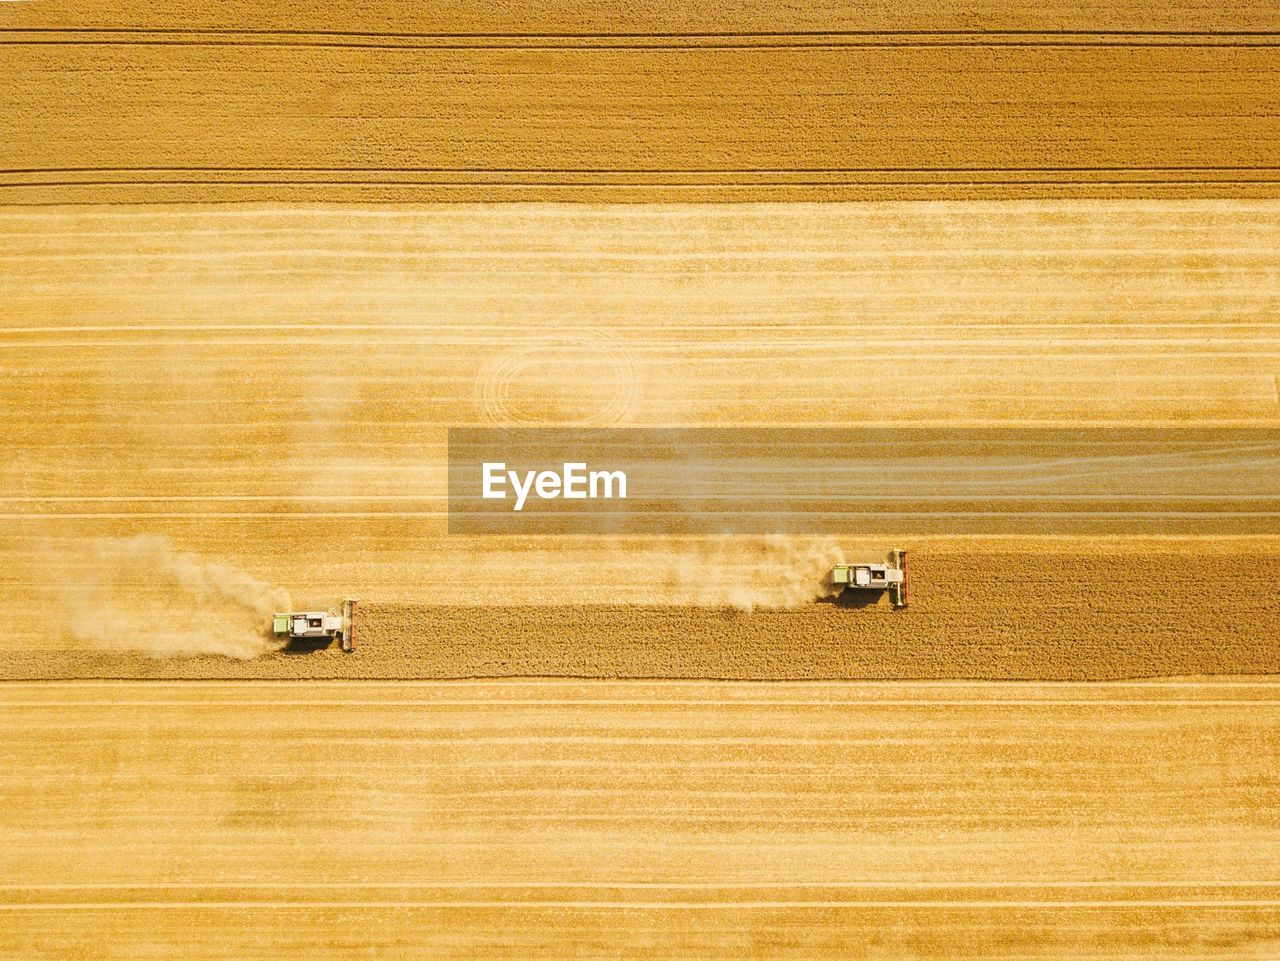 High angle view of tractors on agricultural field